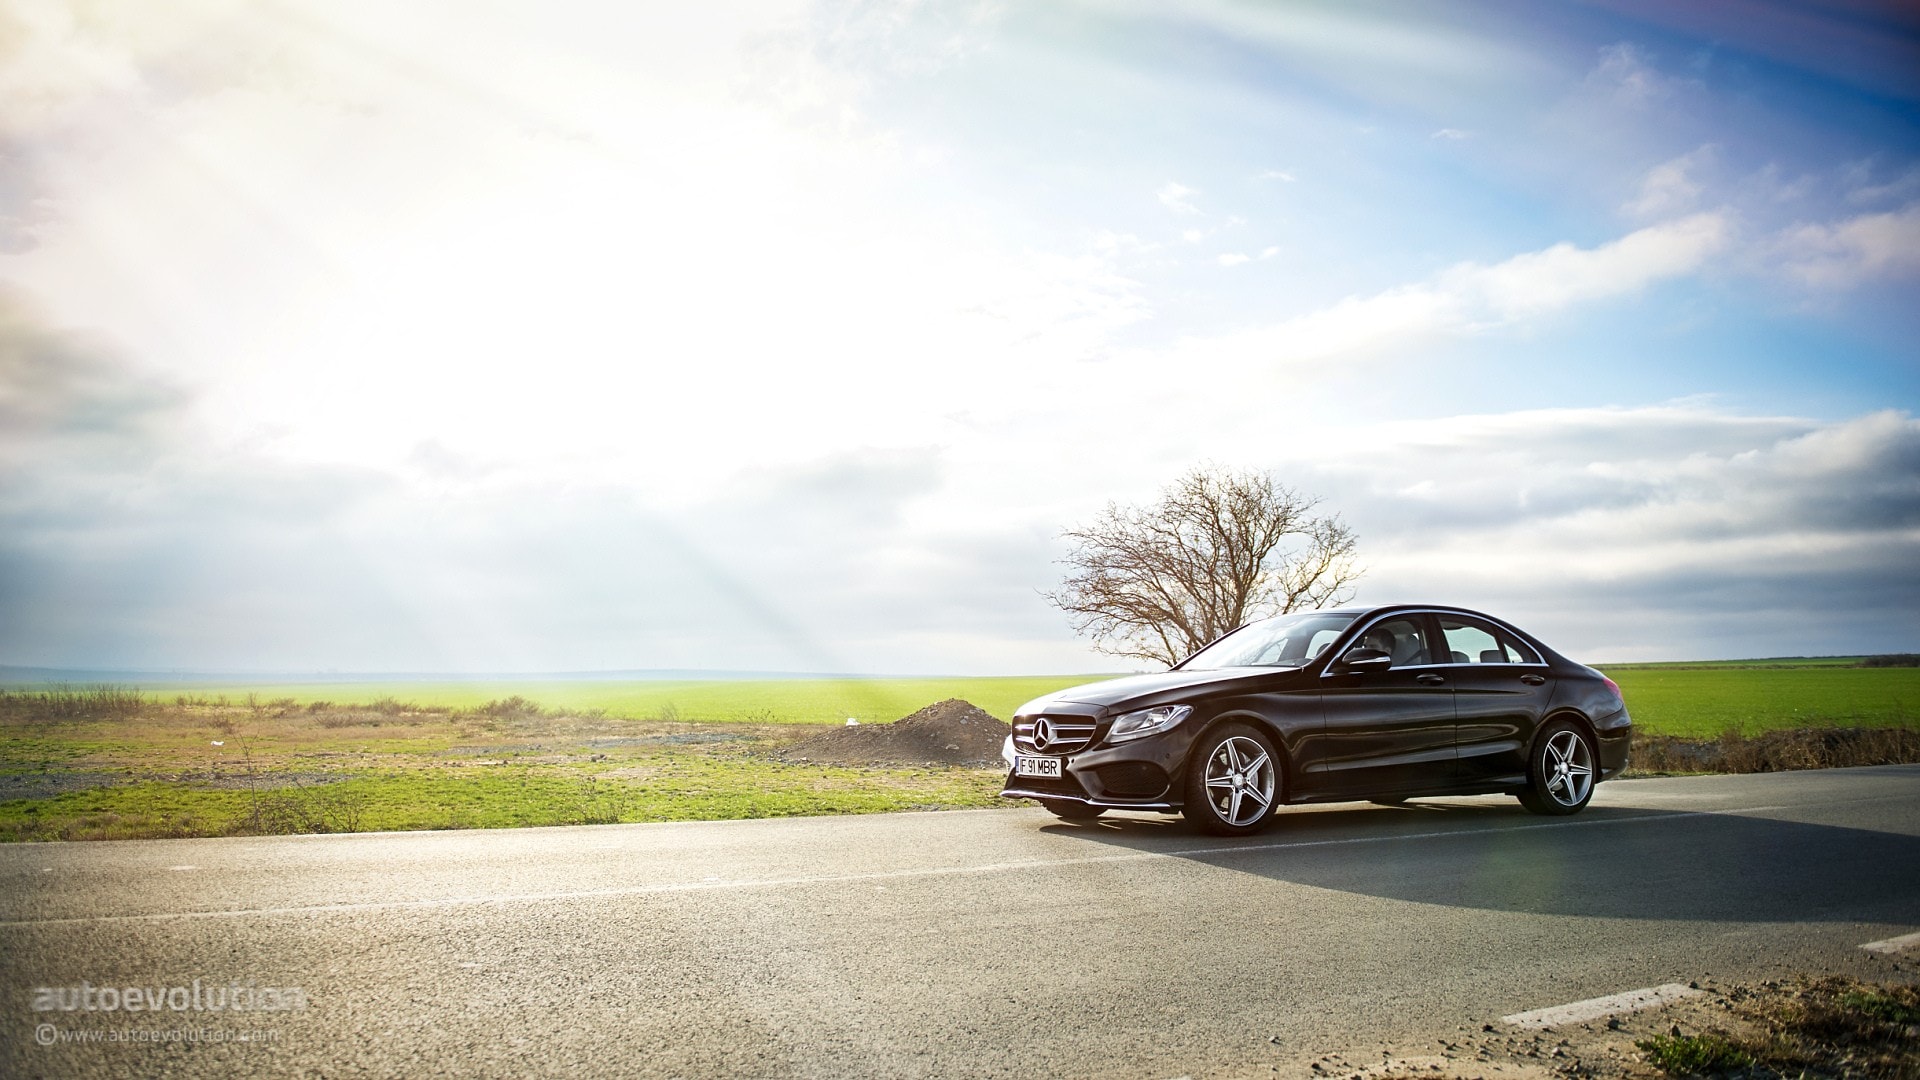 2015 mercedes benz c class hd wallpapers they call it baby s class for a reason 95666_2